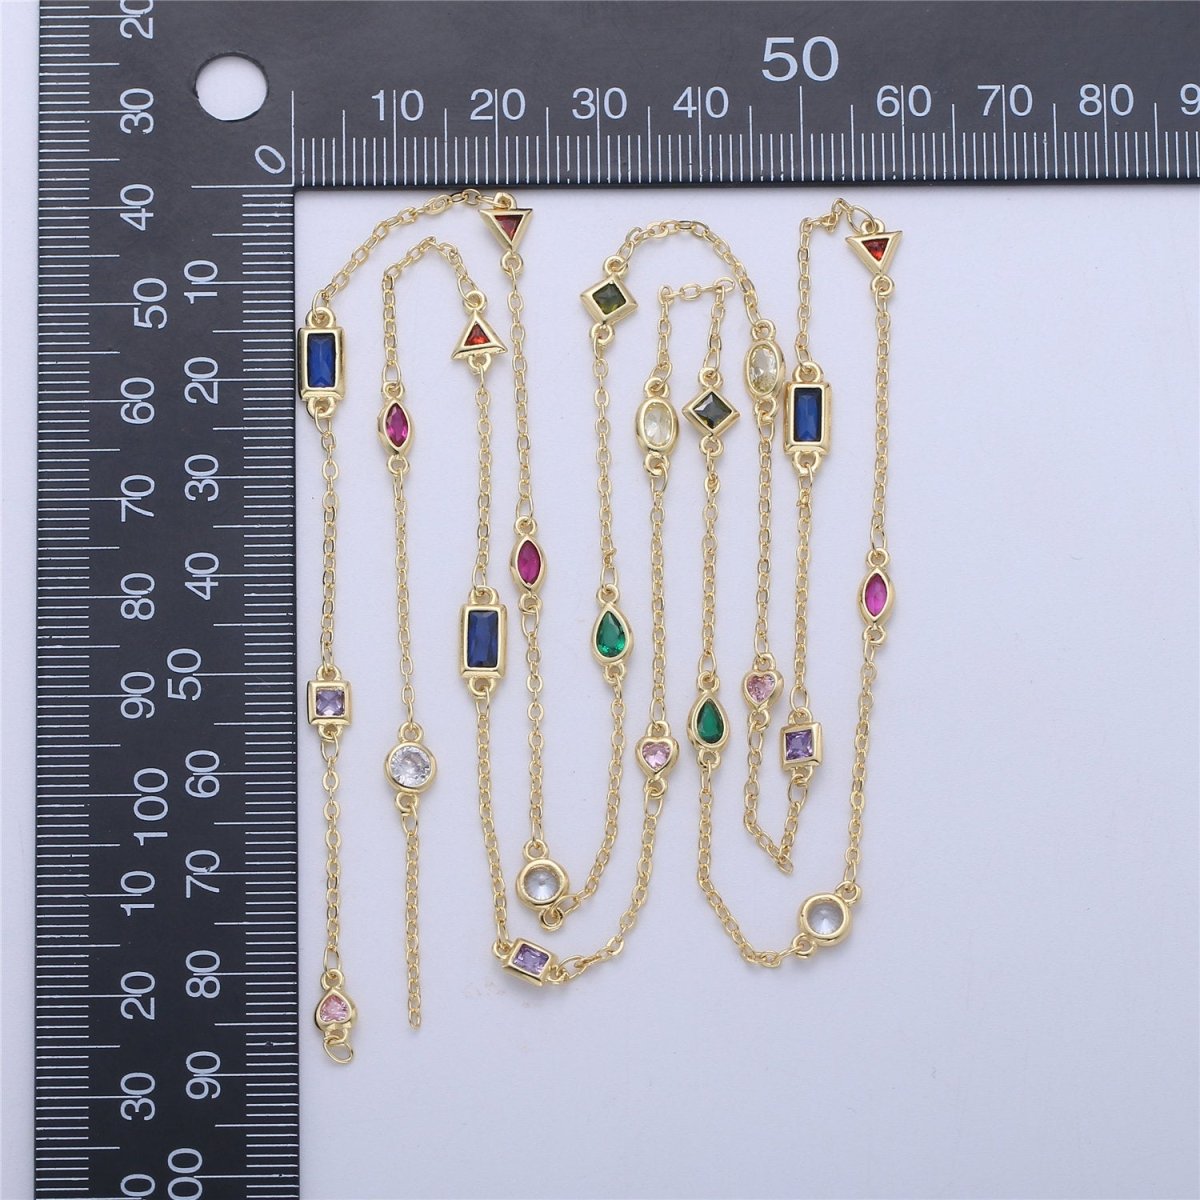 OS 24K Gold Filled Chain Necklace Gold Necklace CZ Stone Necklace Gemstone Necklace Crystal Necklace, Dainty Bulk Chain Necklace By Yard, White Gold Filled DESIGNED Chain Component Supply | ROLL-055, ROLL-056 Clearance Pricing - DLUXCA